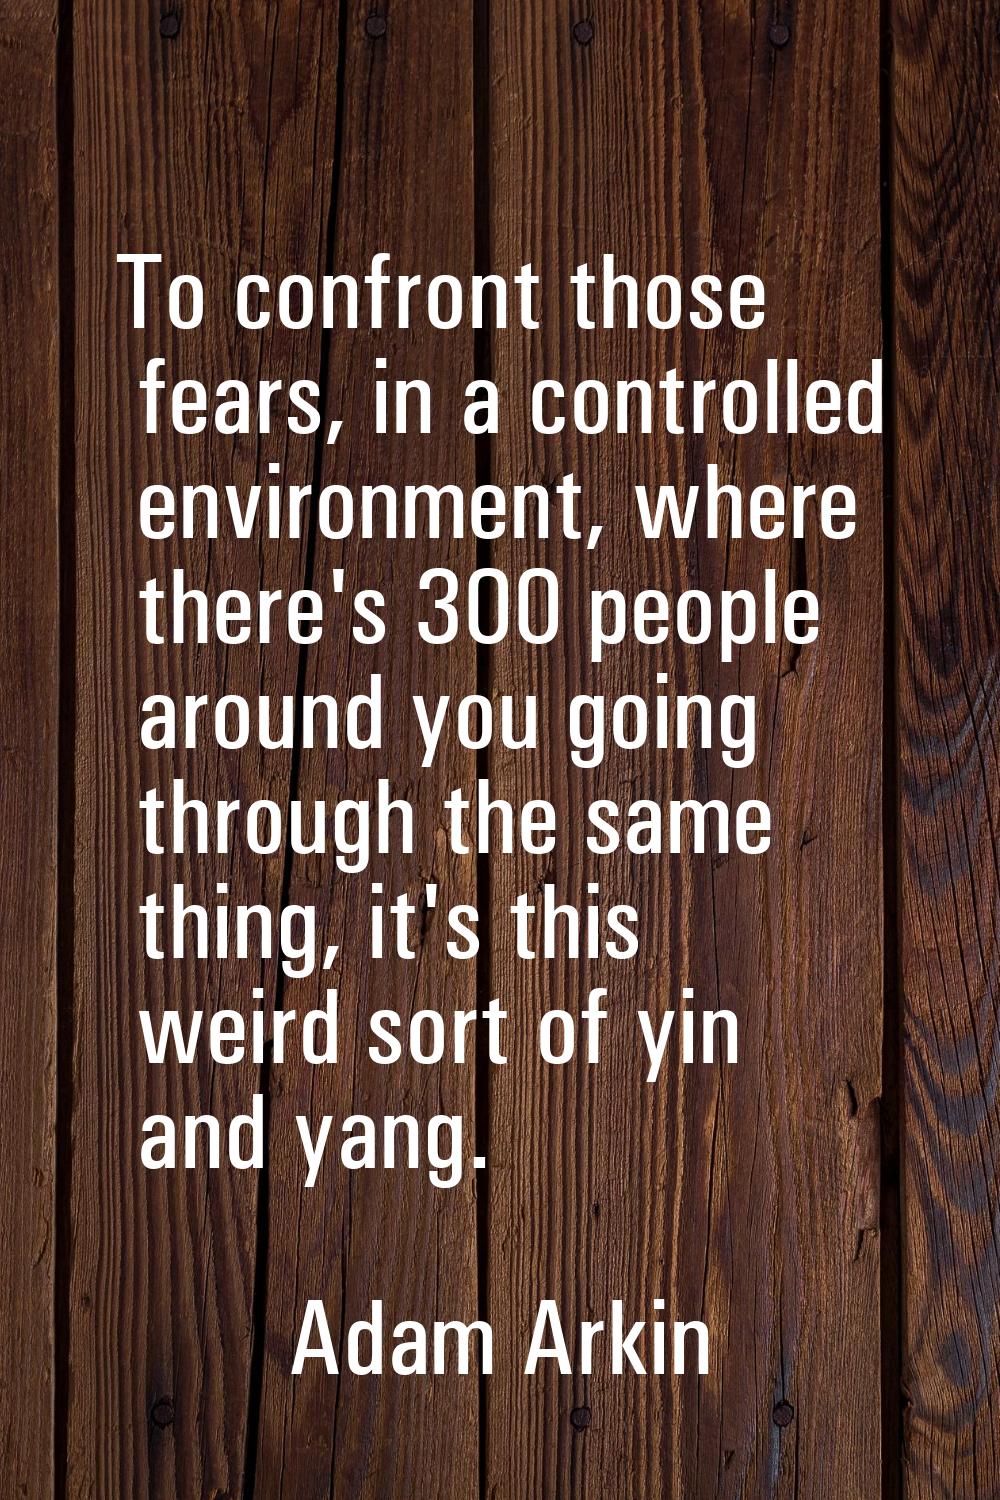 To confront those fears, in a controlled environment, where there's 300 people around you going thr